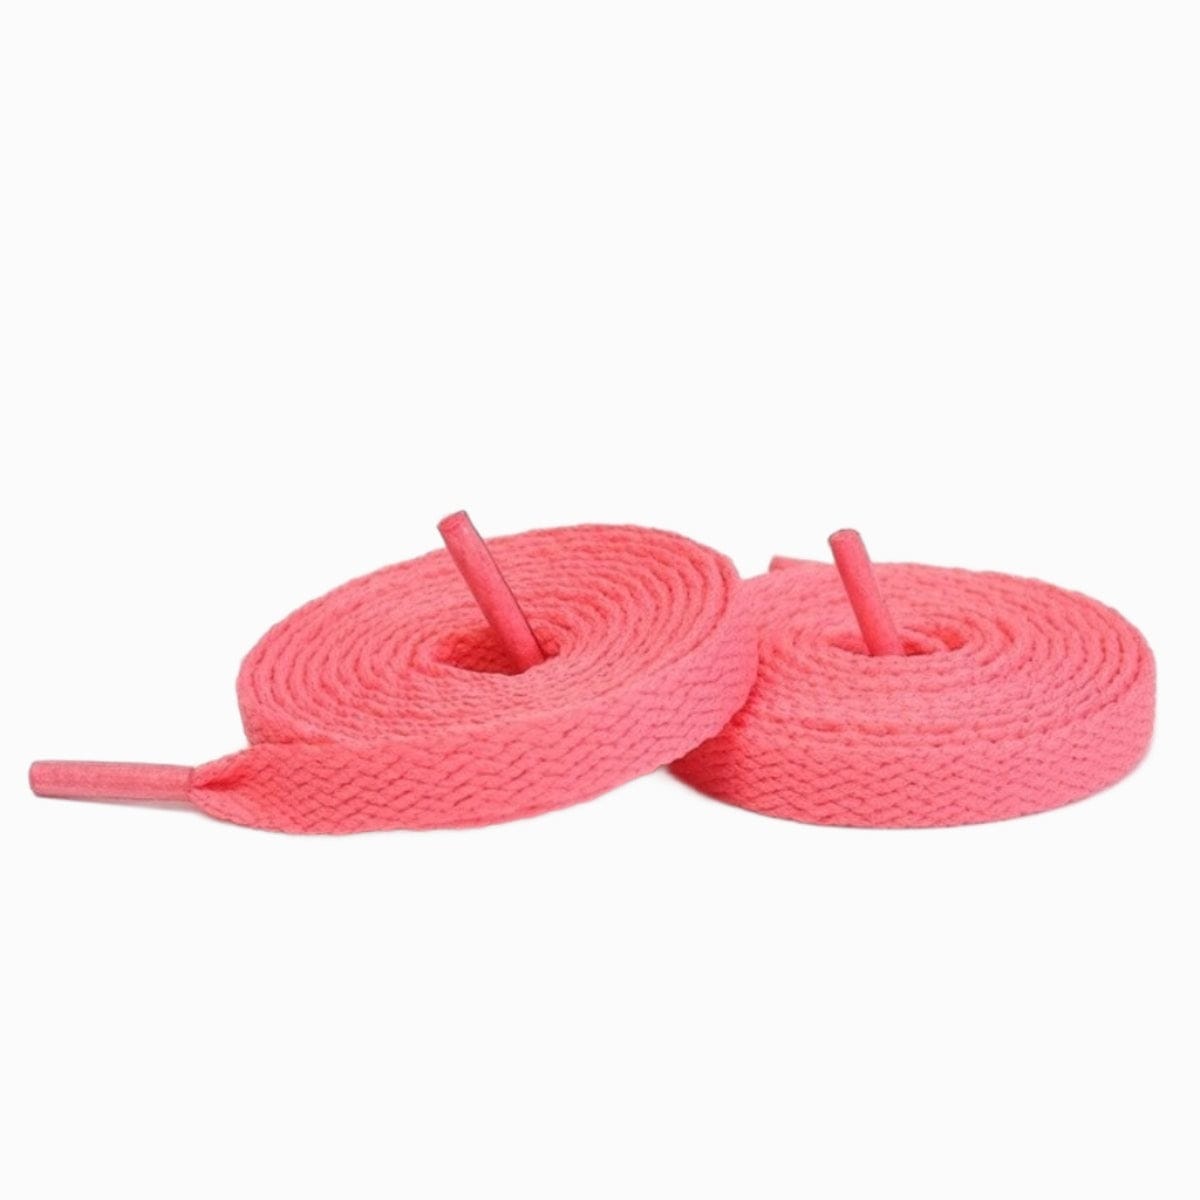 Watermelon Red Replacement Adidas Shoe Laces for Adidas Handball Spezial Sneakers by Kicks Shoelaces